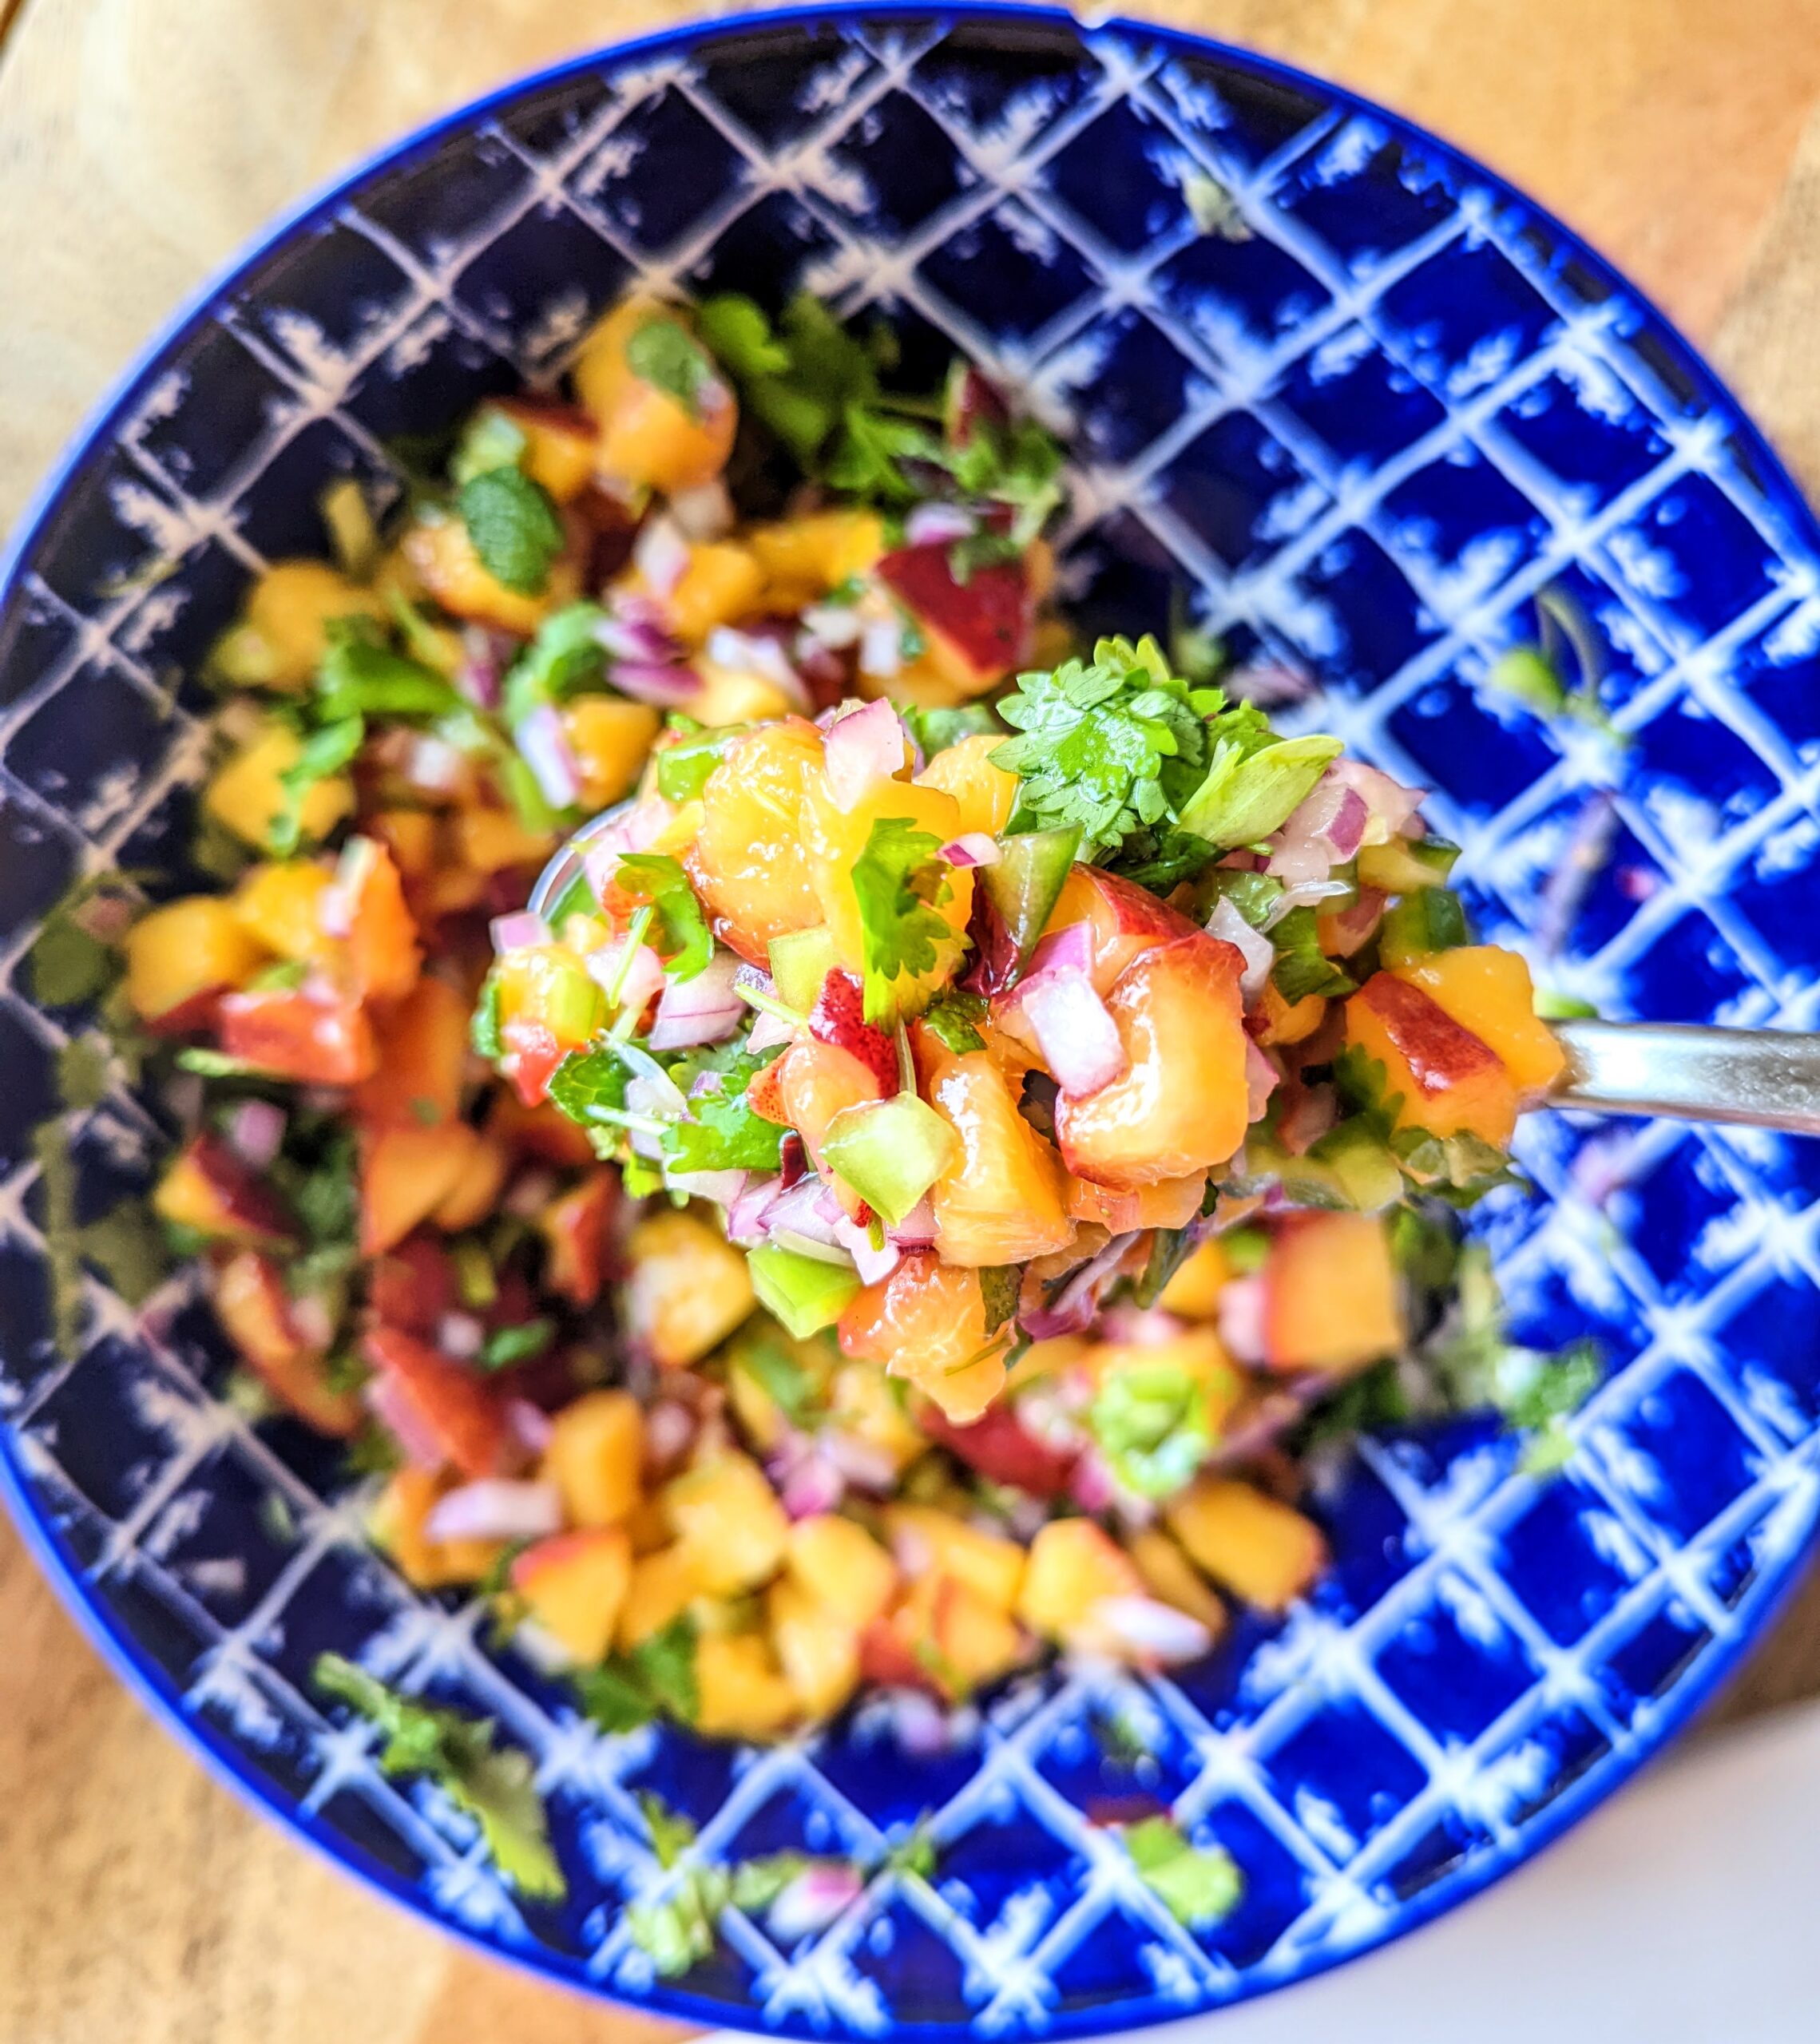 Stirring up some vibrant peach salsa in an indigo and white bowl.